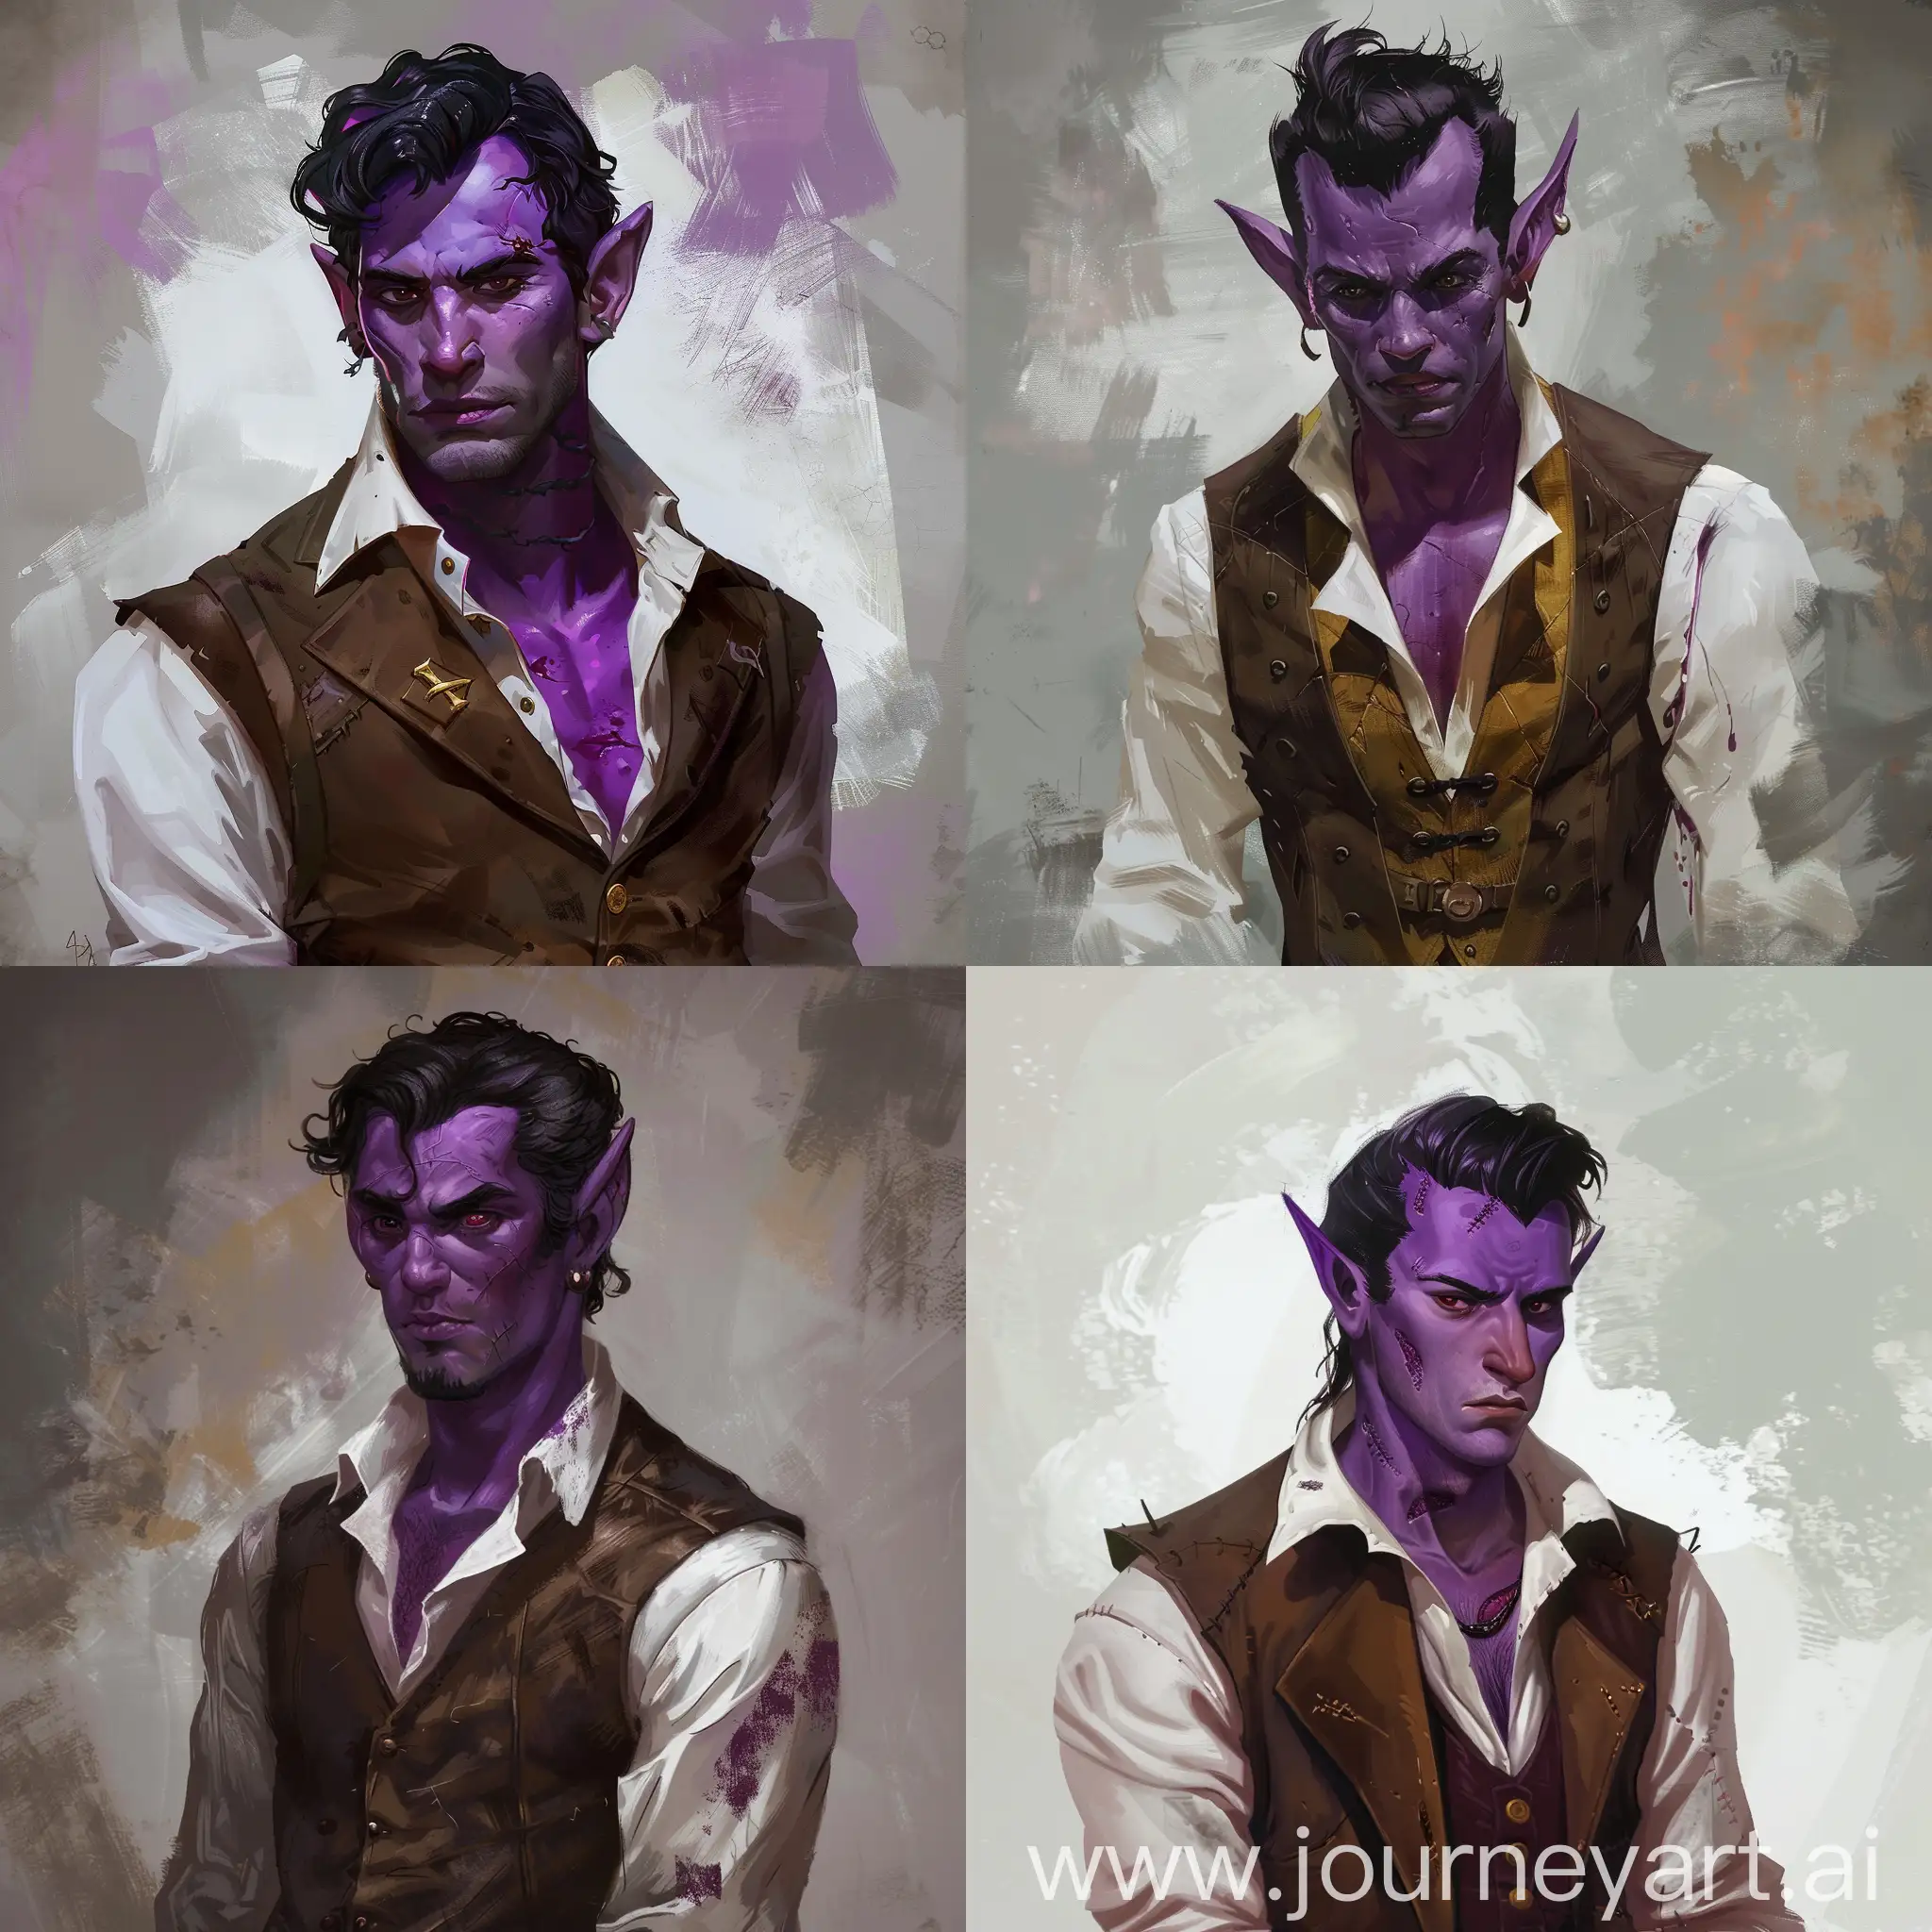 D&D portrait. A tiefling male with violet skin, black hair, dressed in brown suit vest made of heavy fabric and white shirt. Little scars on his face, tired look